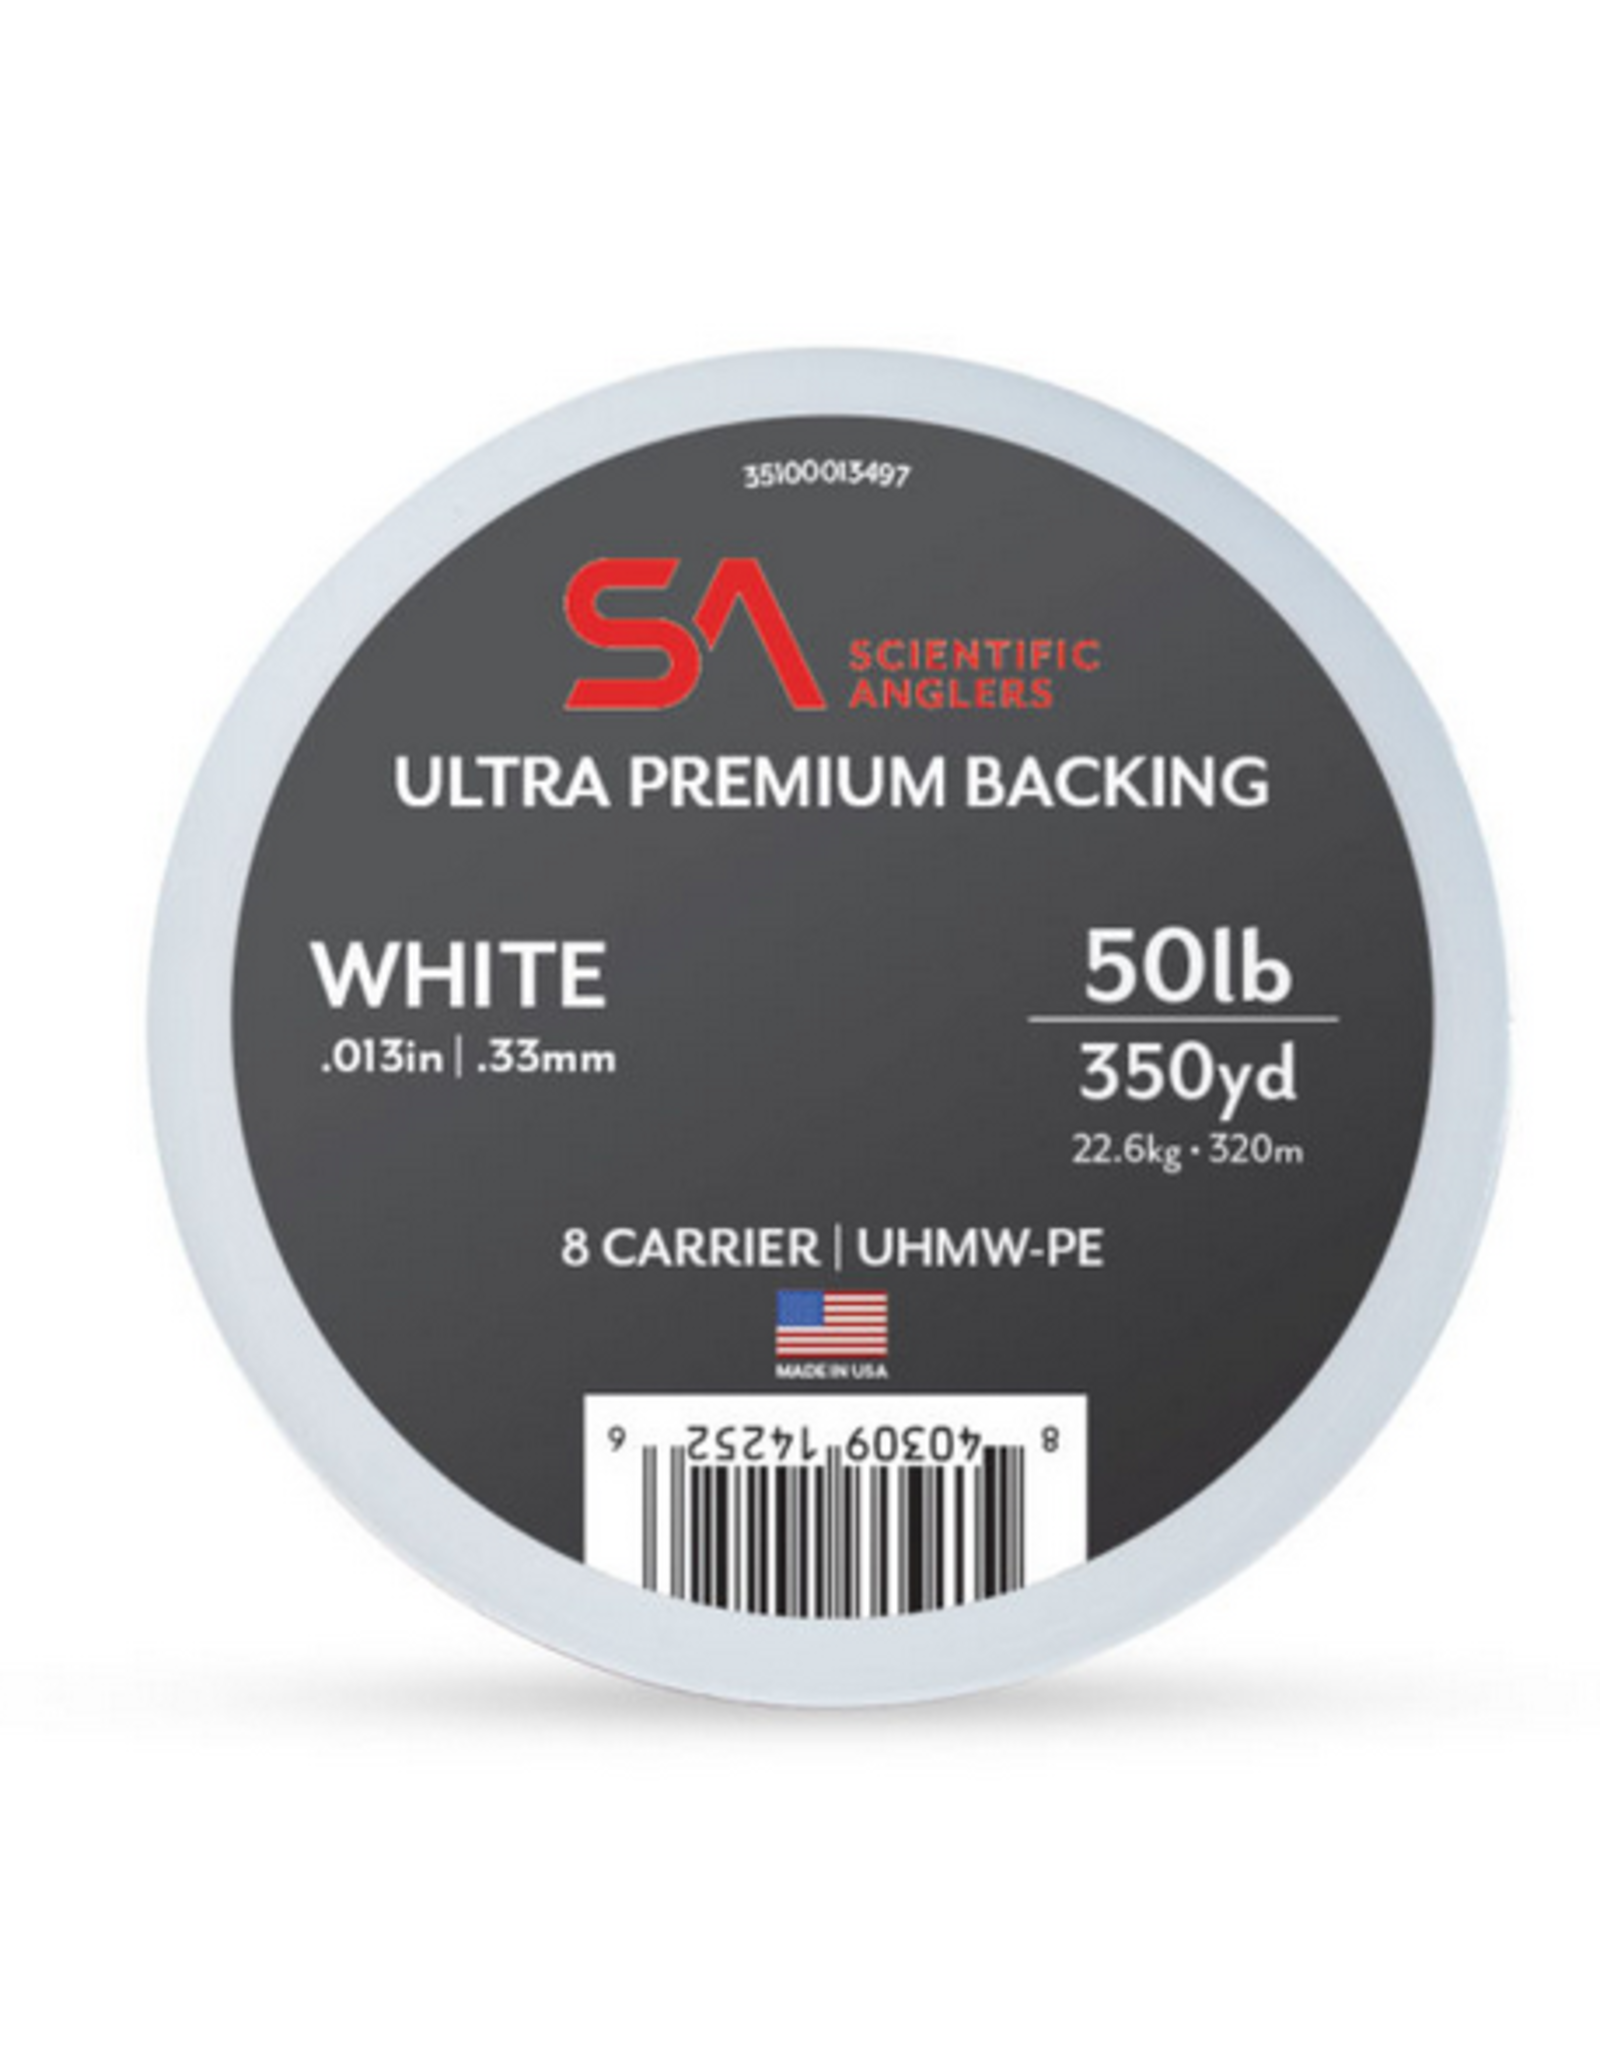 Scientific Anglers Scientific Anglers Ultra Premium 8 Carrier Backing (350yd-White-50lb)